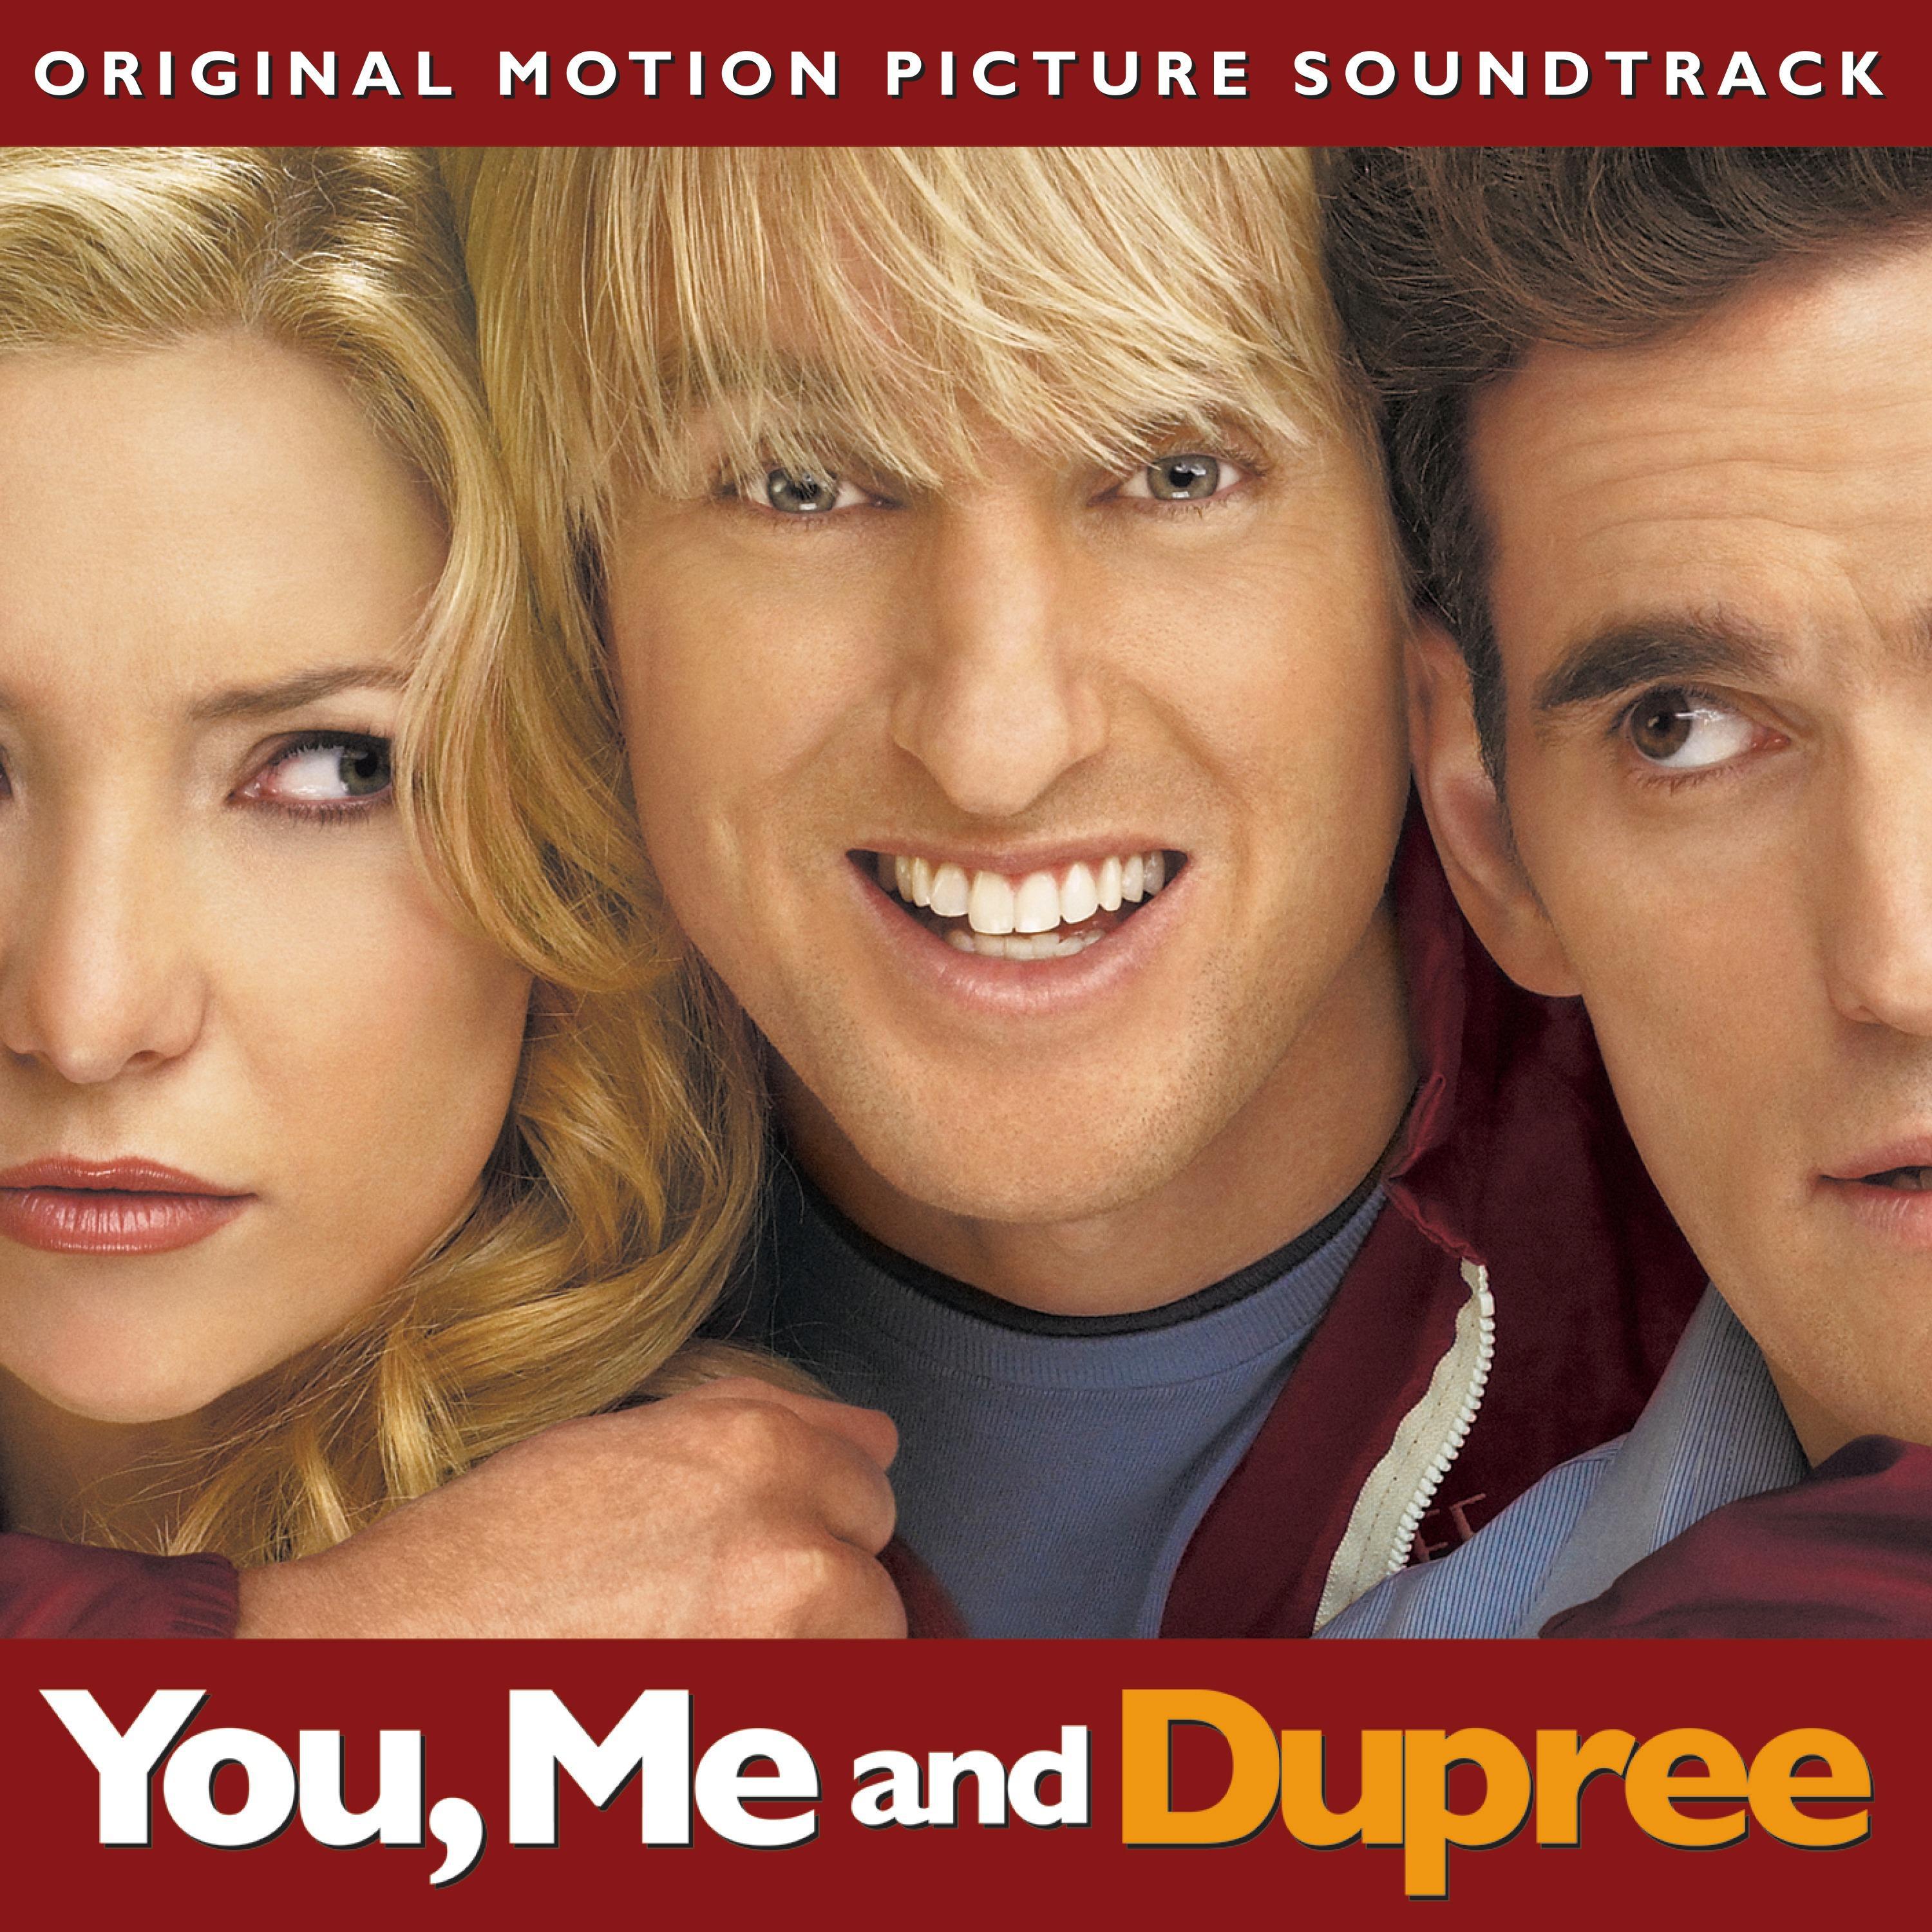 You, Me and Dupree (Original Motion Picture Soundtrack)